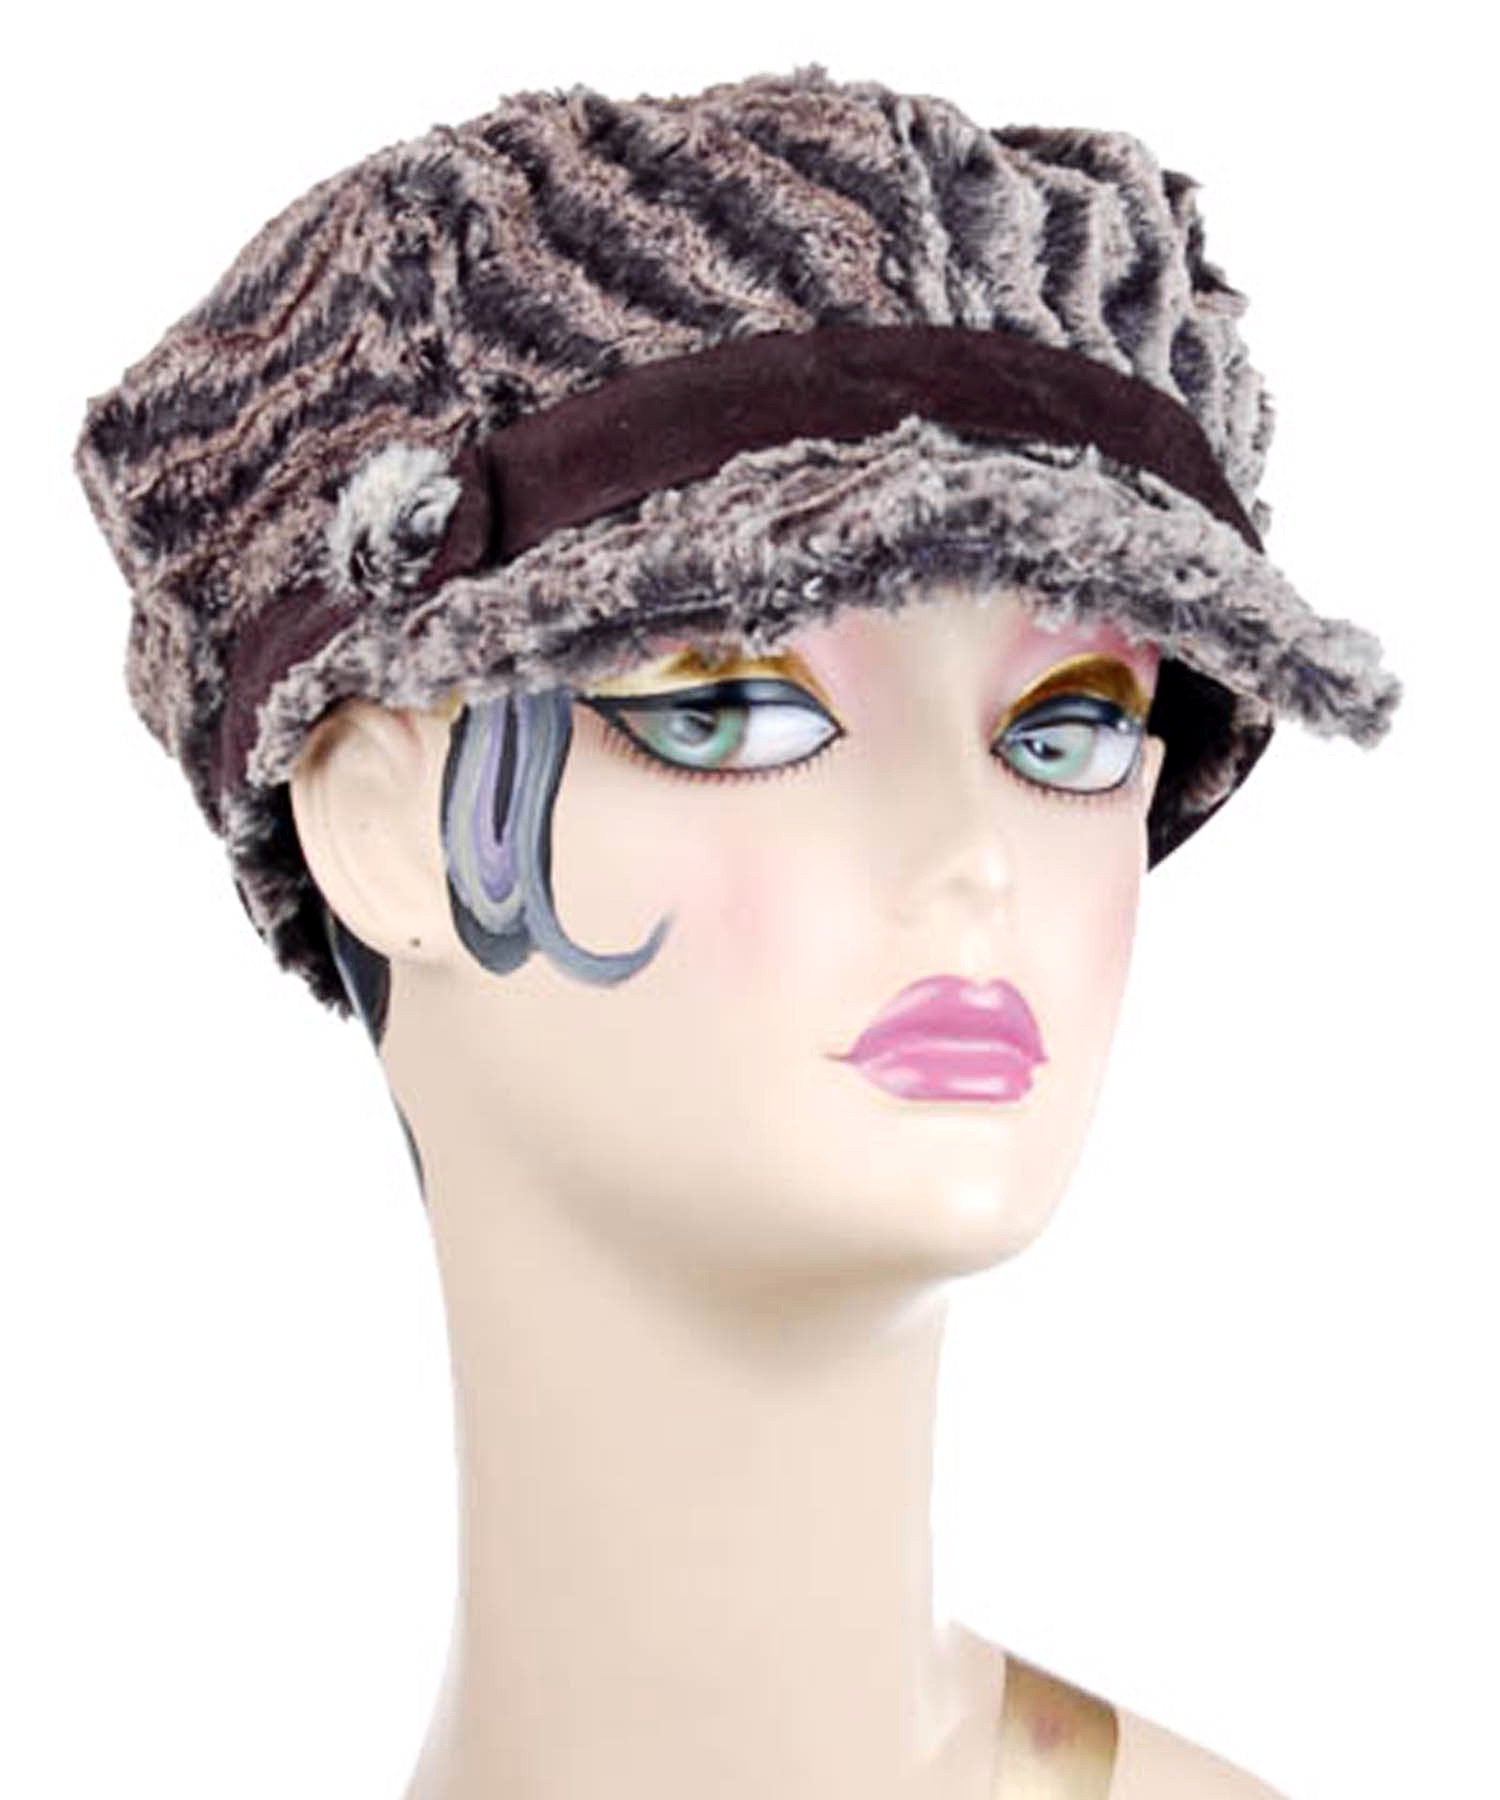 Model is wearing a Valerie Hat Desert Sand in Charcoal with Buckle by Pandemonium Millinery. Handmade in Seattle WA USA.